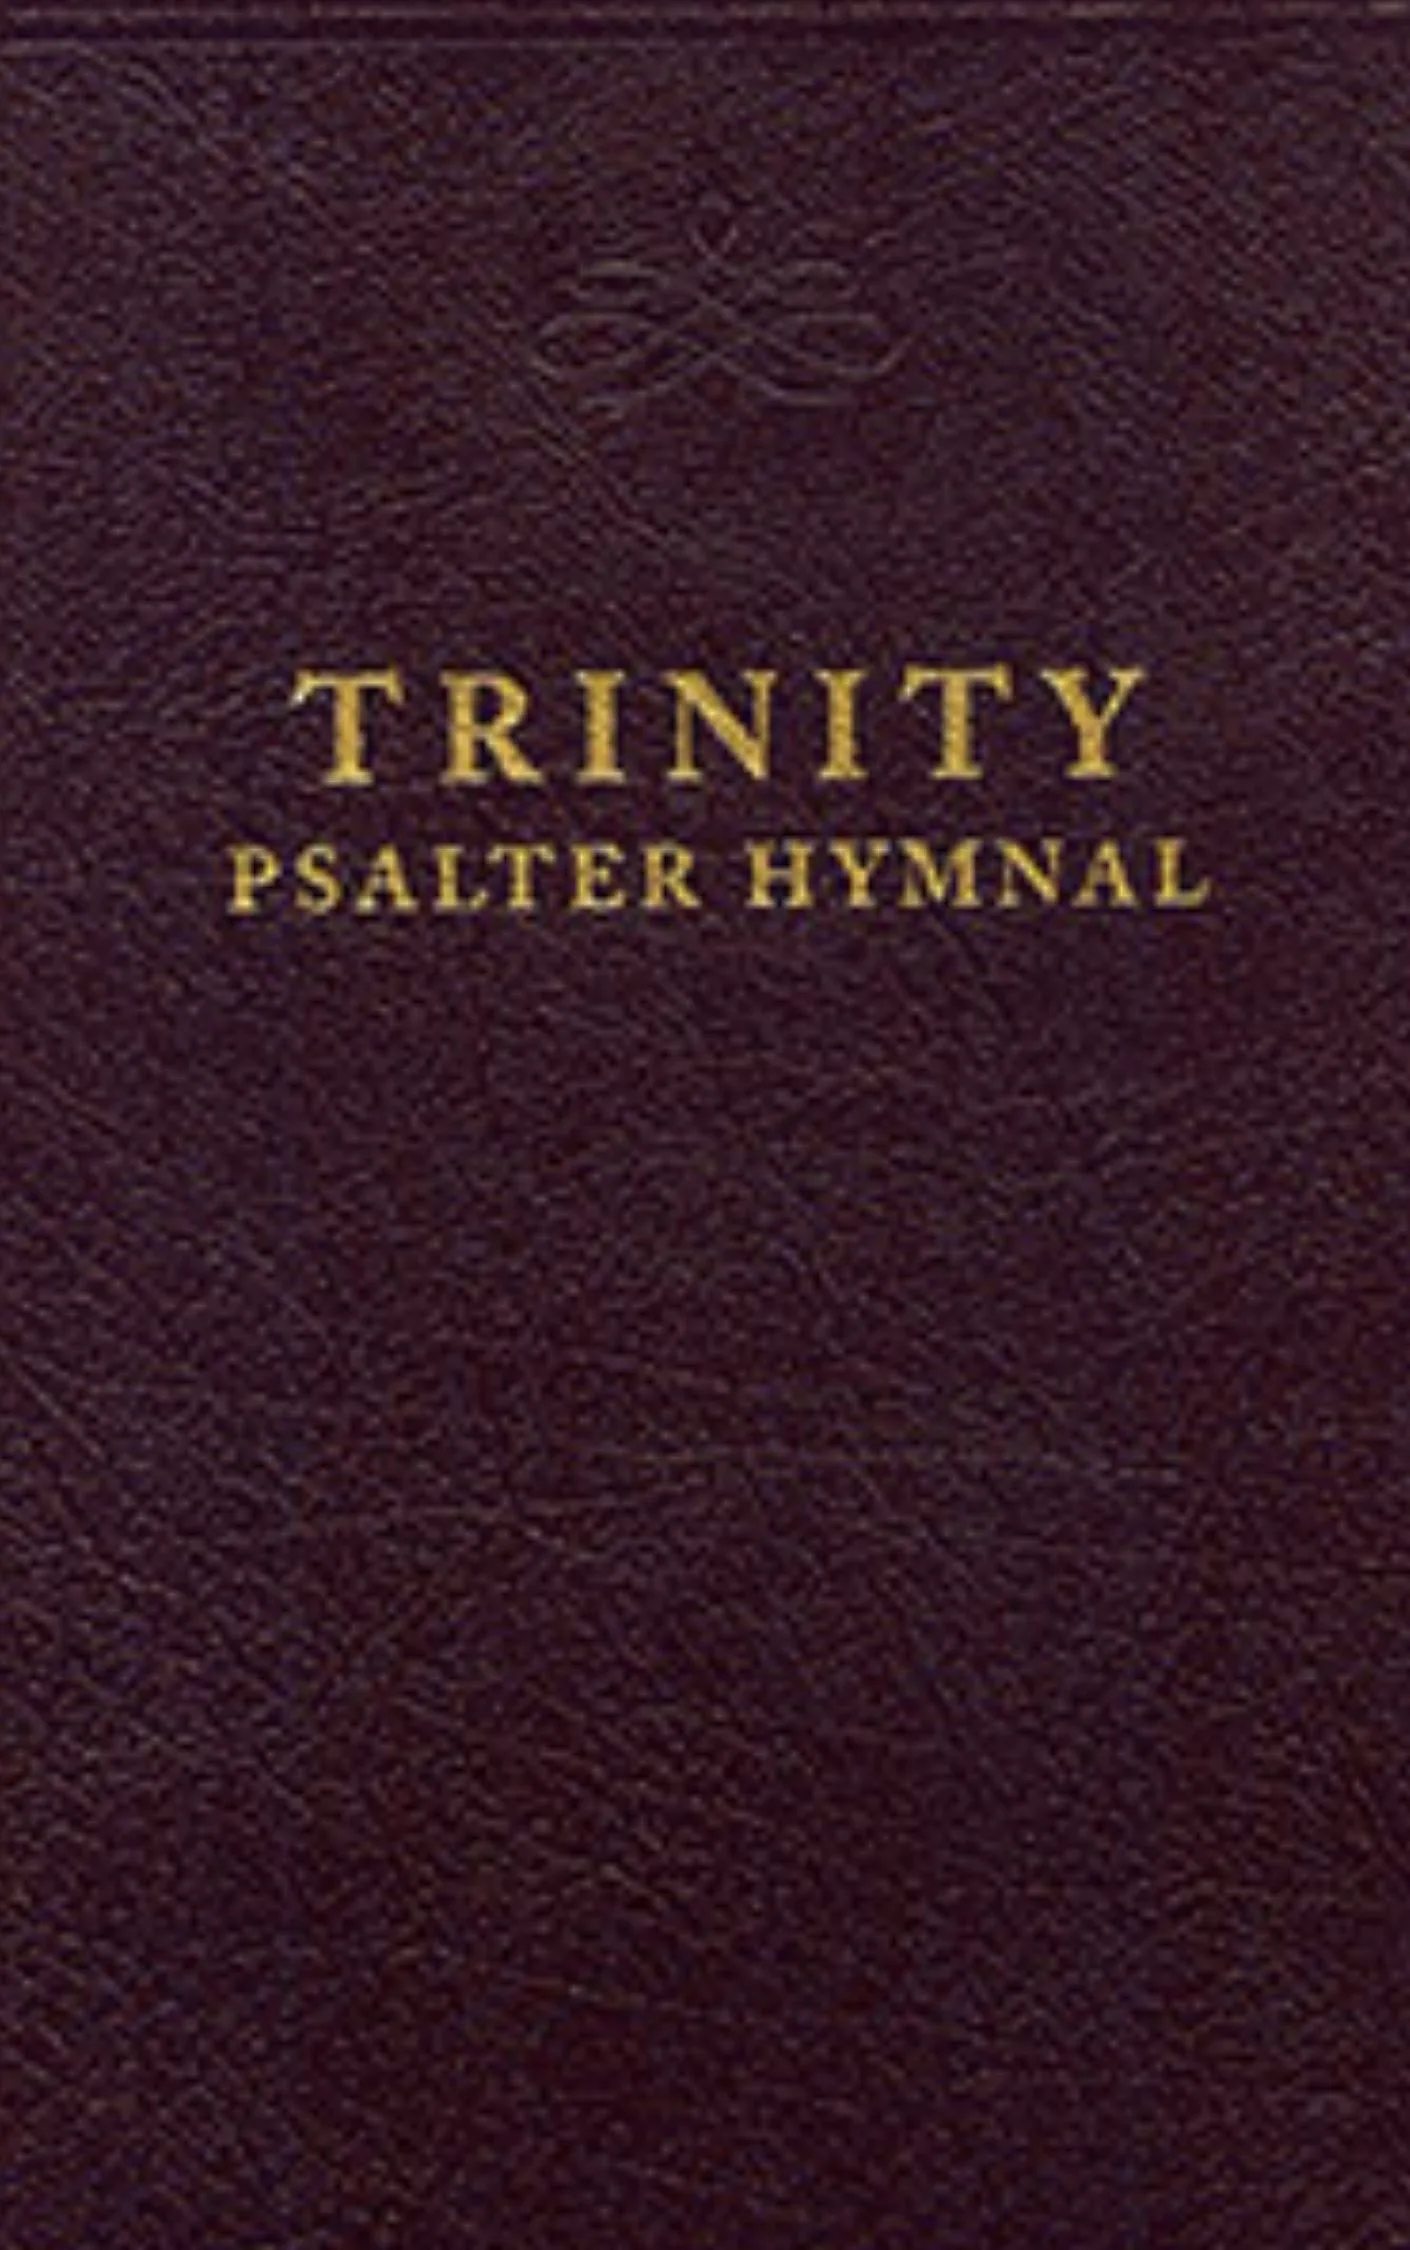 Trinity Psalter Hymnal by Cantus Christi 2020